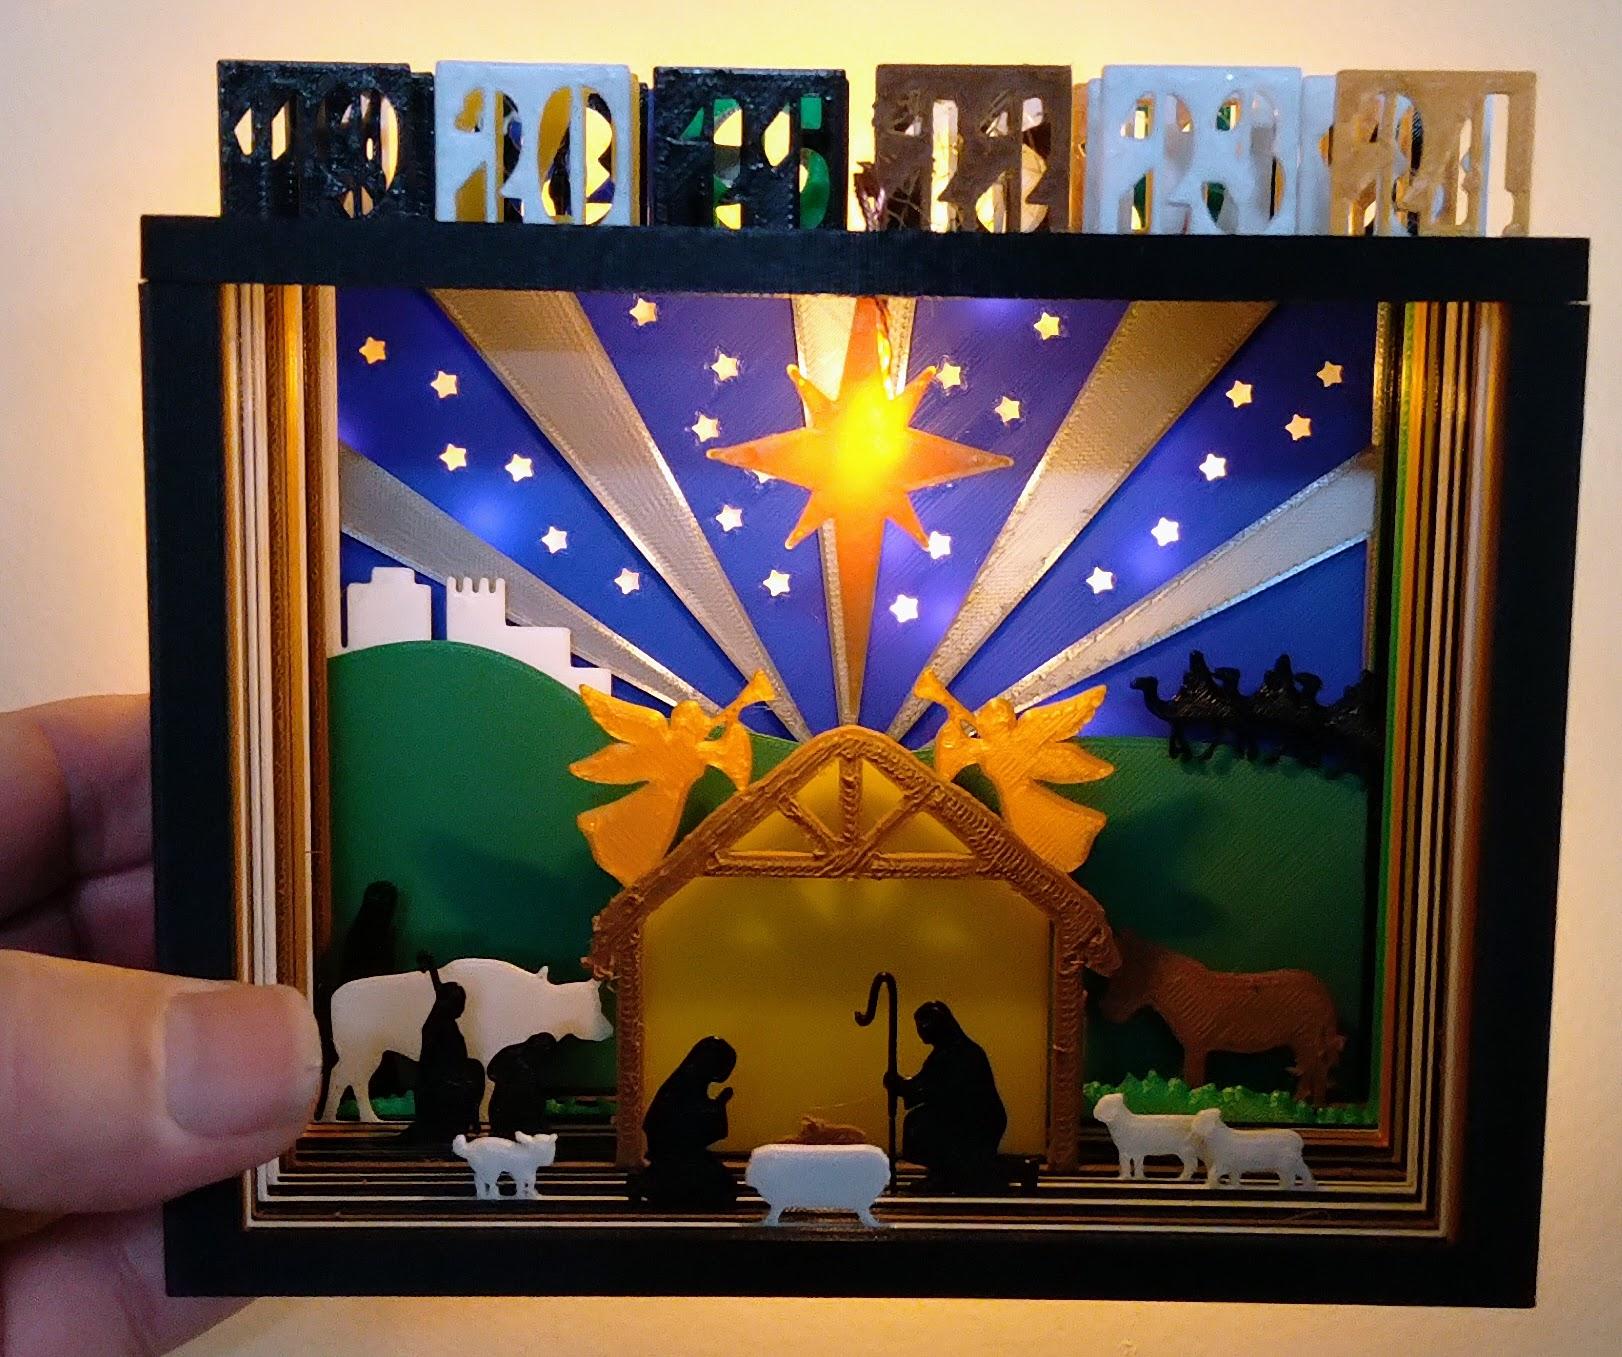 Silhouette Advent Calendar - I added some lights to the project - 3d model